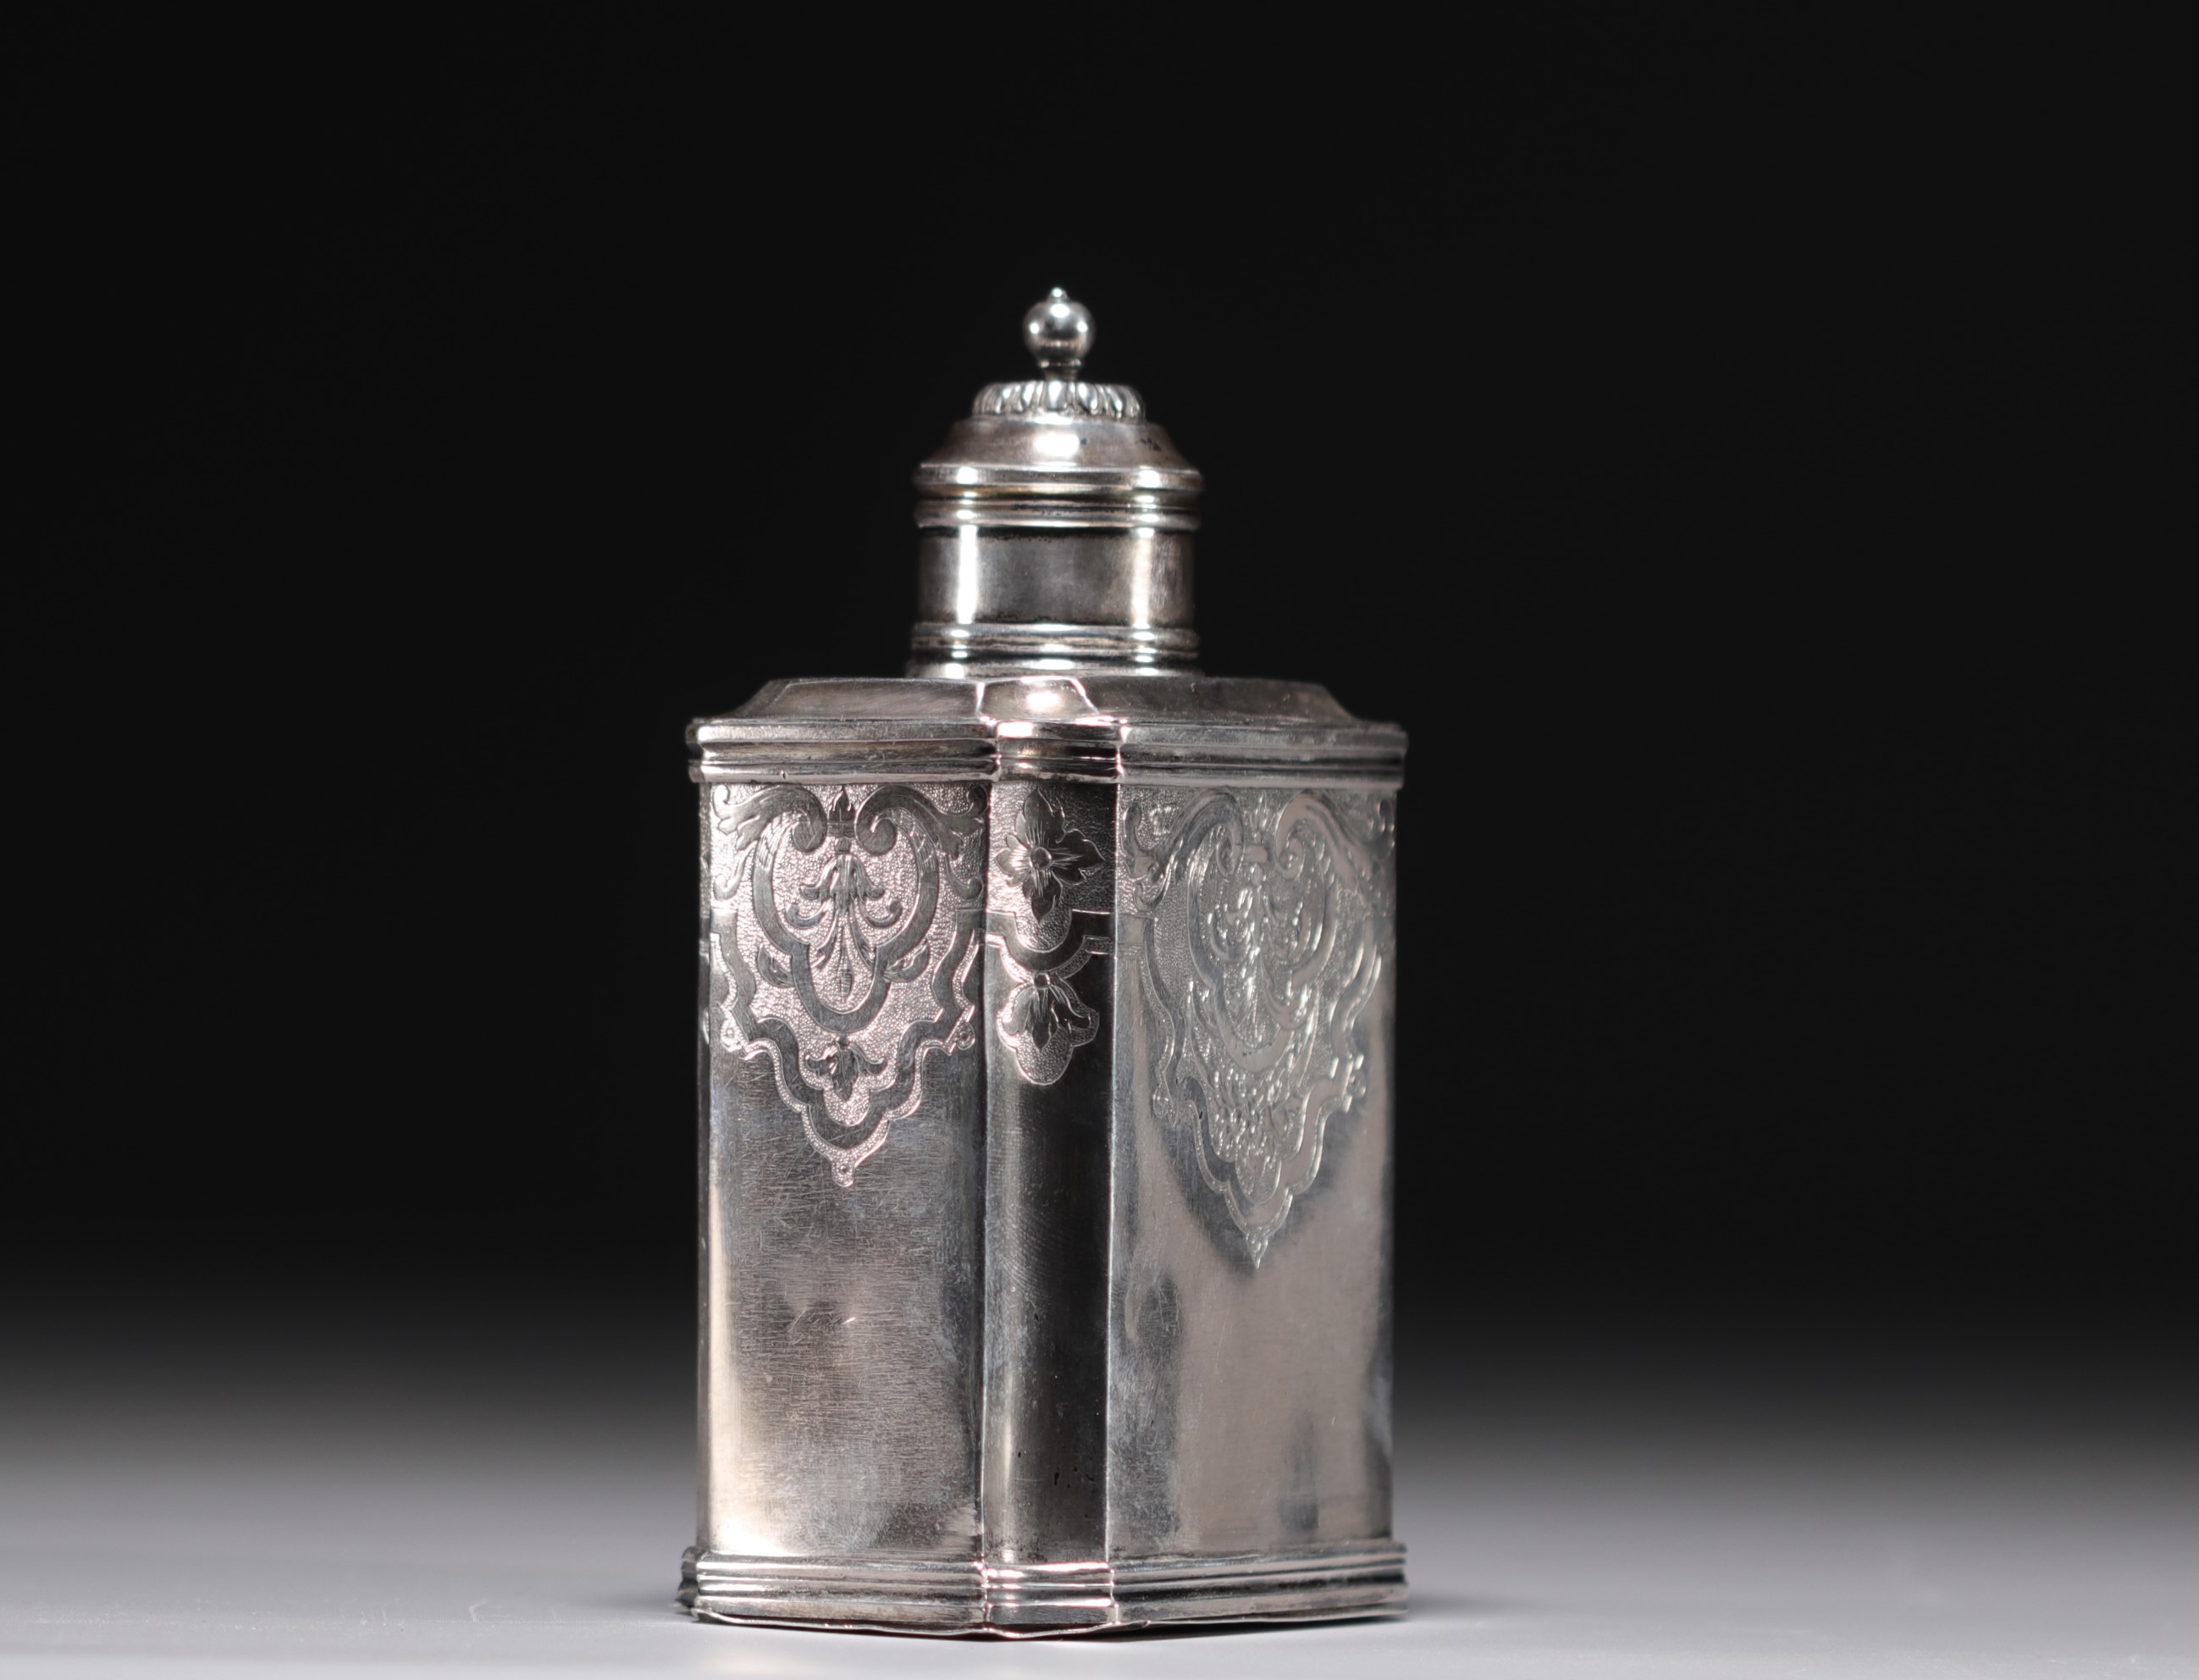 Silver tea caddy, French hallmark of imported work. - Image 2 of 4